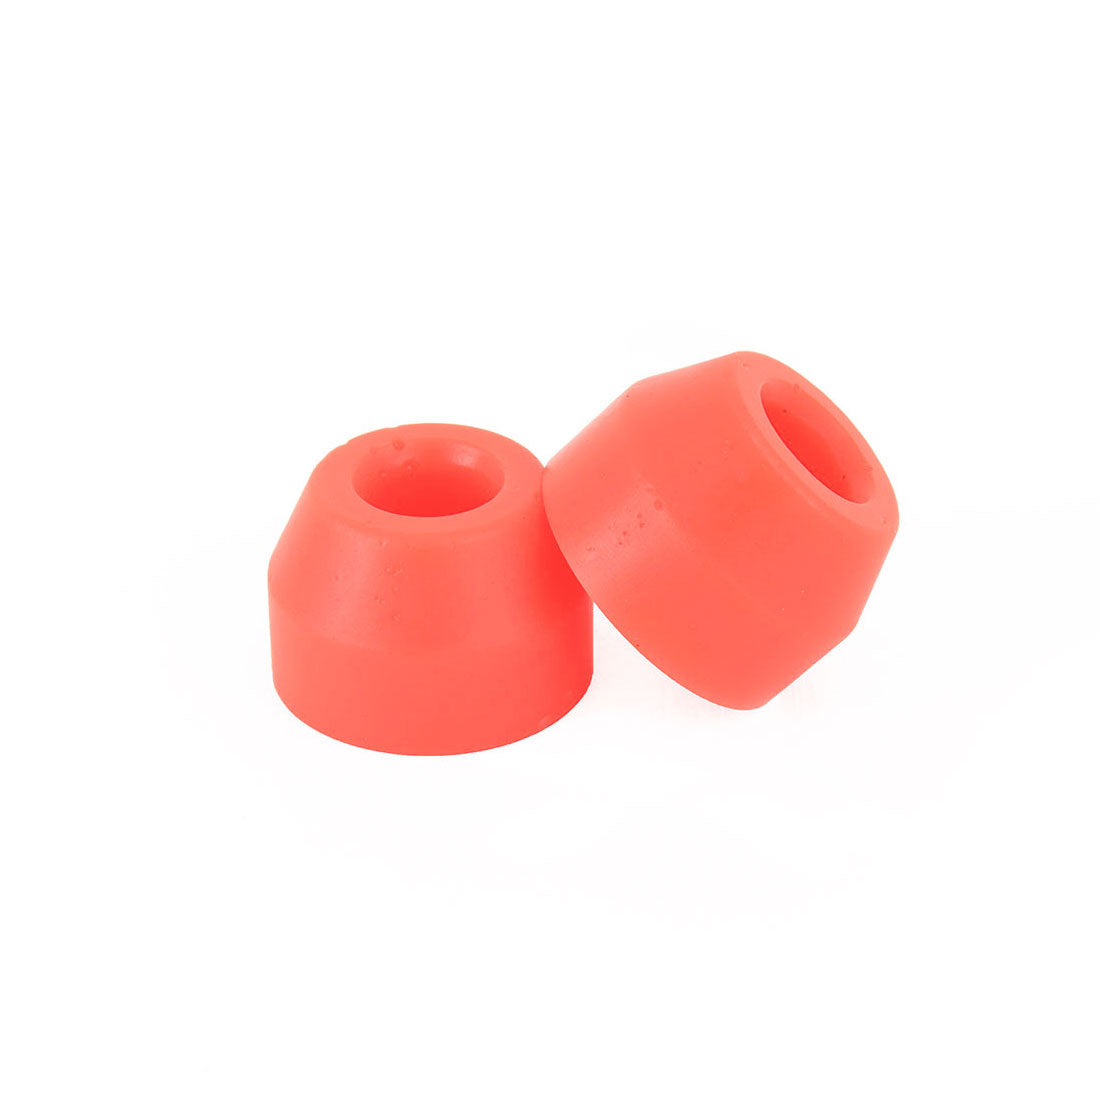 Spew Monkey 95a .650 Cone Bushings 2pk - Fluro Red Skateboard Hardware and Parts